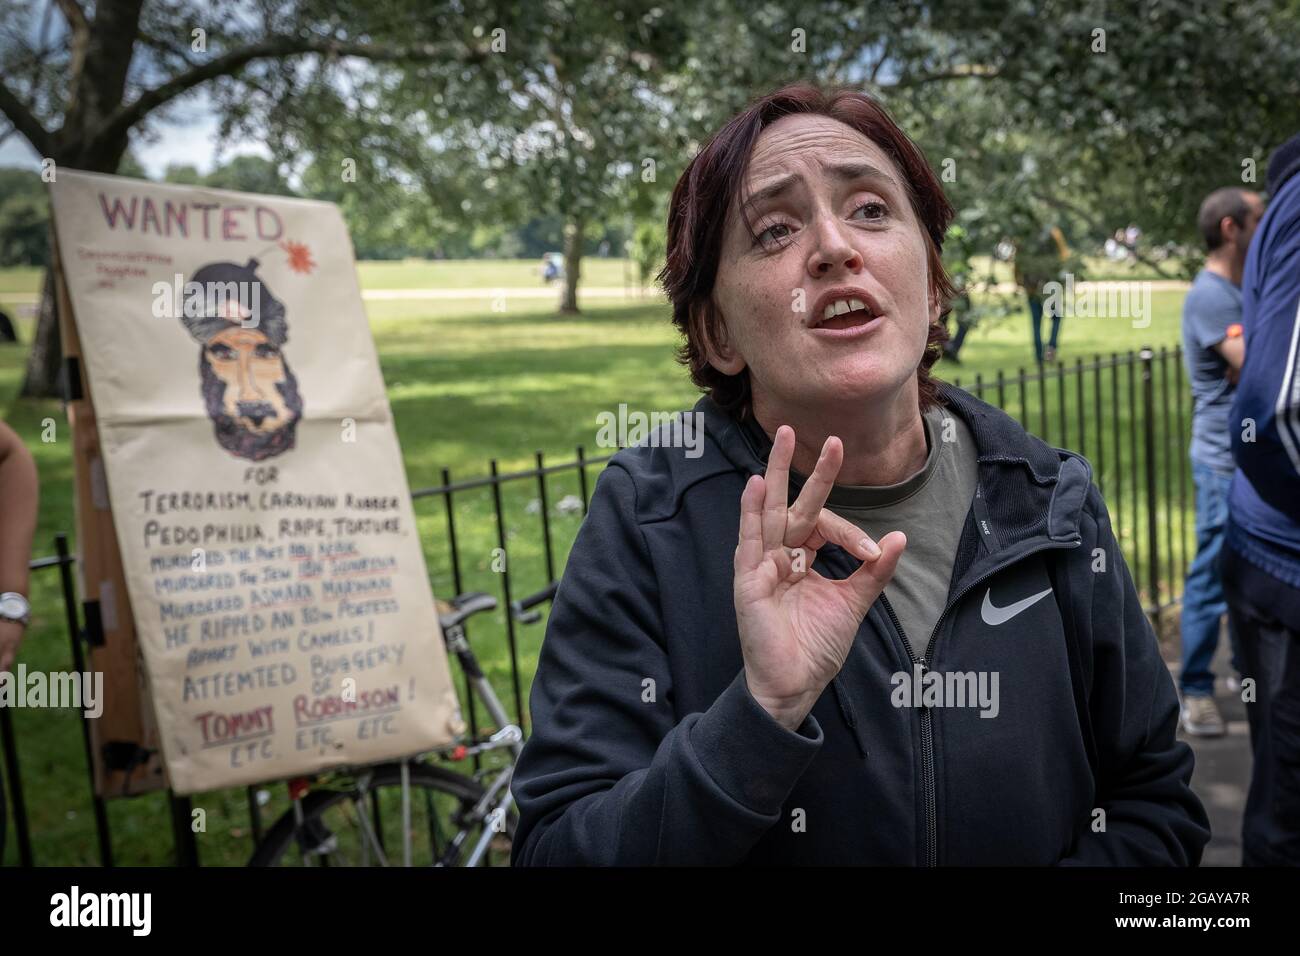 London, UK. 1st August, 2021. Anne Marie Waters, founder of controversial anti-Islam party 'For Britain' is interviewed at Speakers' Corner in Hyde Park the week after a suspected Islamist attack on a regular Christian preacher. The attacker remains at large with police officers operating an increased surveillance presence at the corner with some officers armed with Taser electronic weaponry. Credit: Guy Corbishley/Alamy Live News Stock Photo